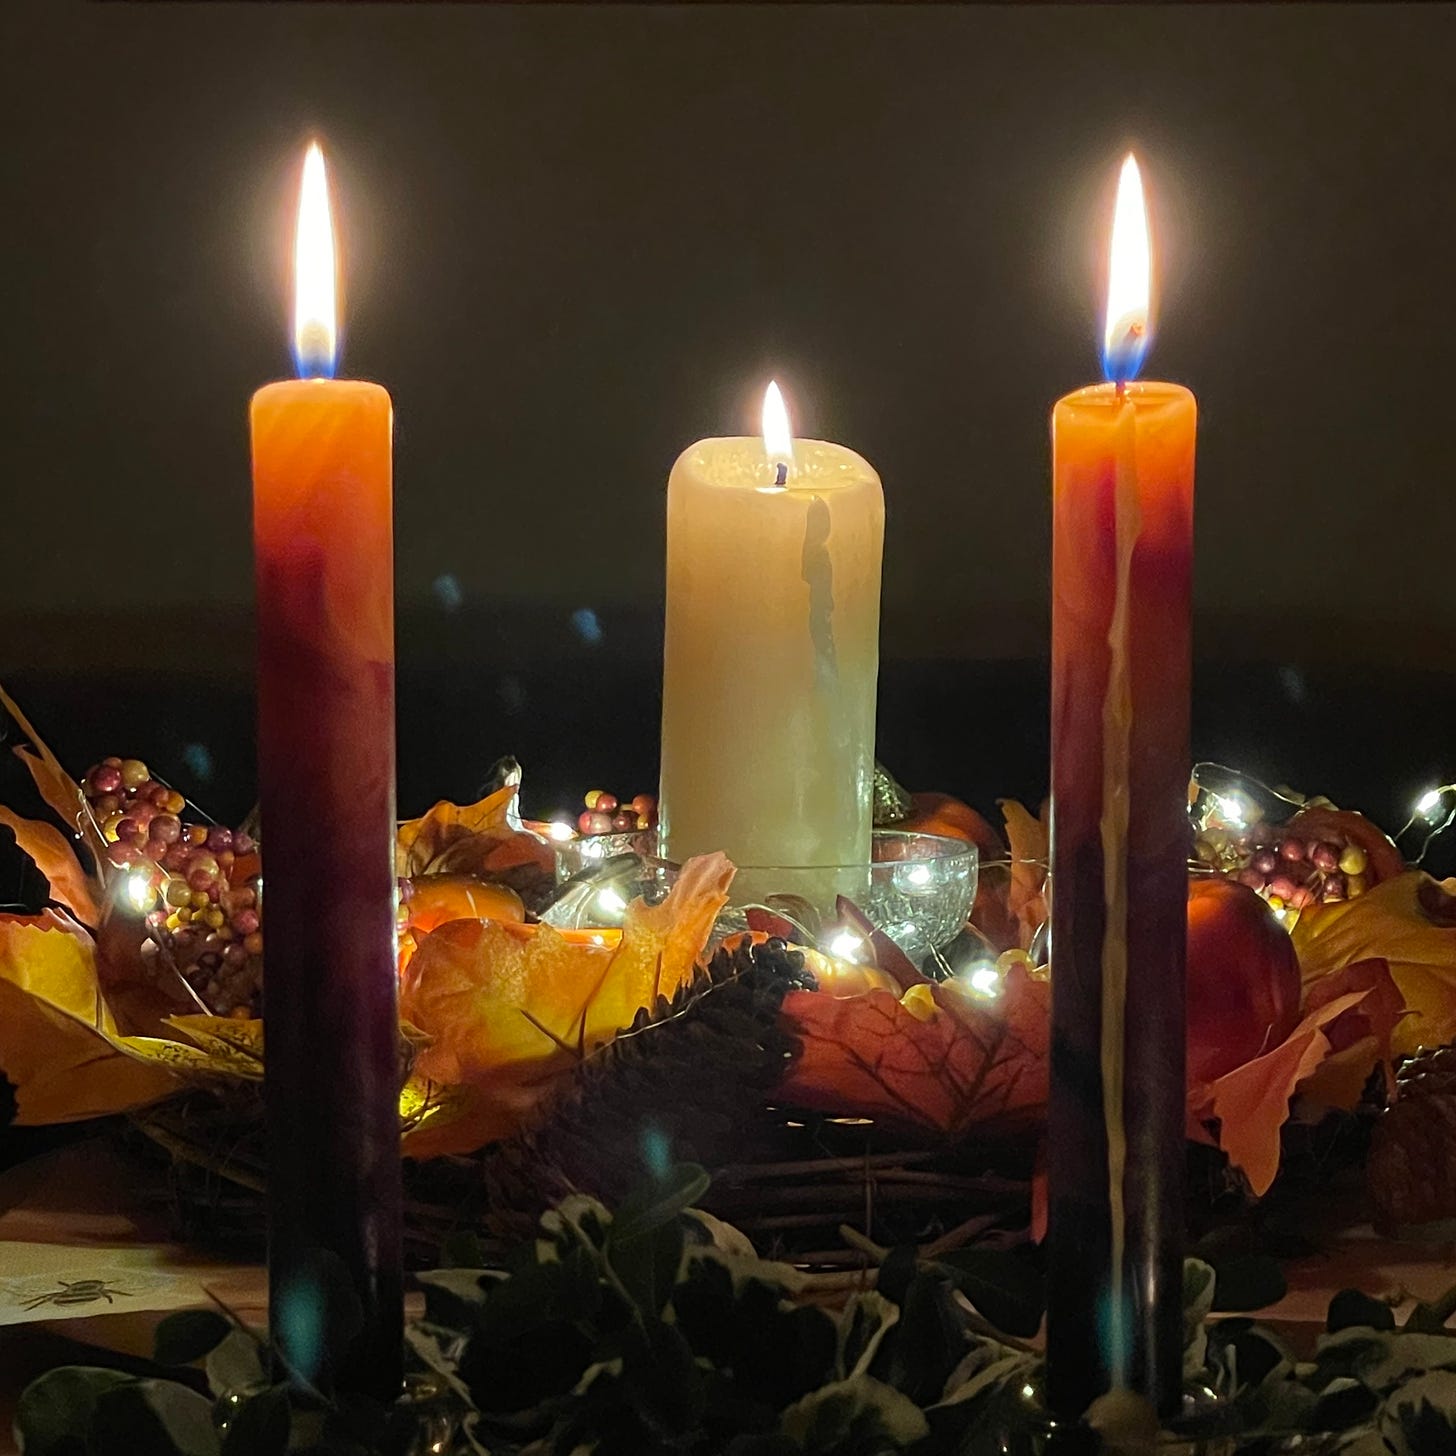 Photo of three lit candles surrounded by leaves and greenery and berries and shining glass. The candles are clearly the only light in the room.